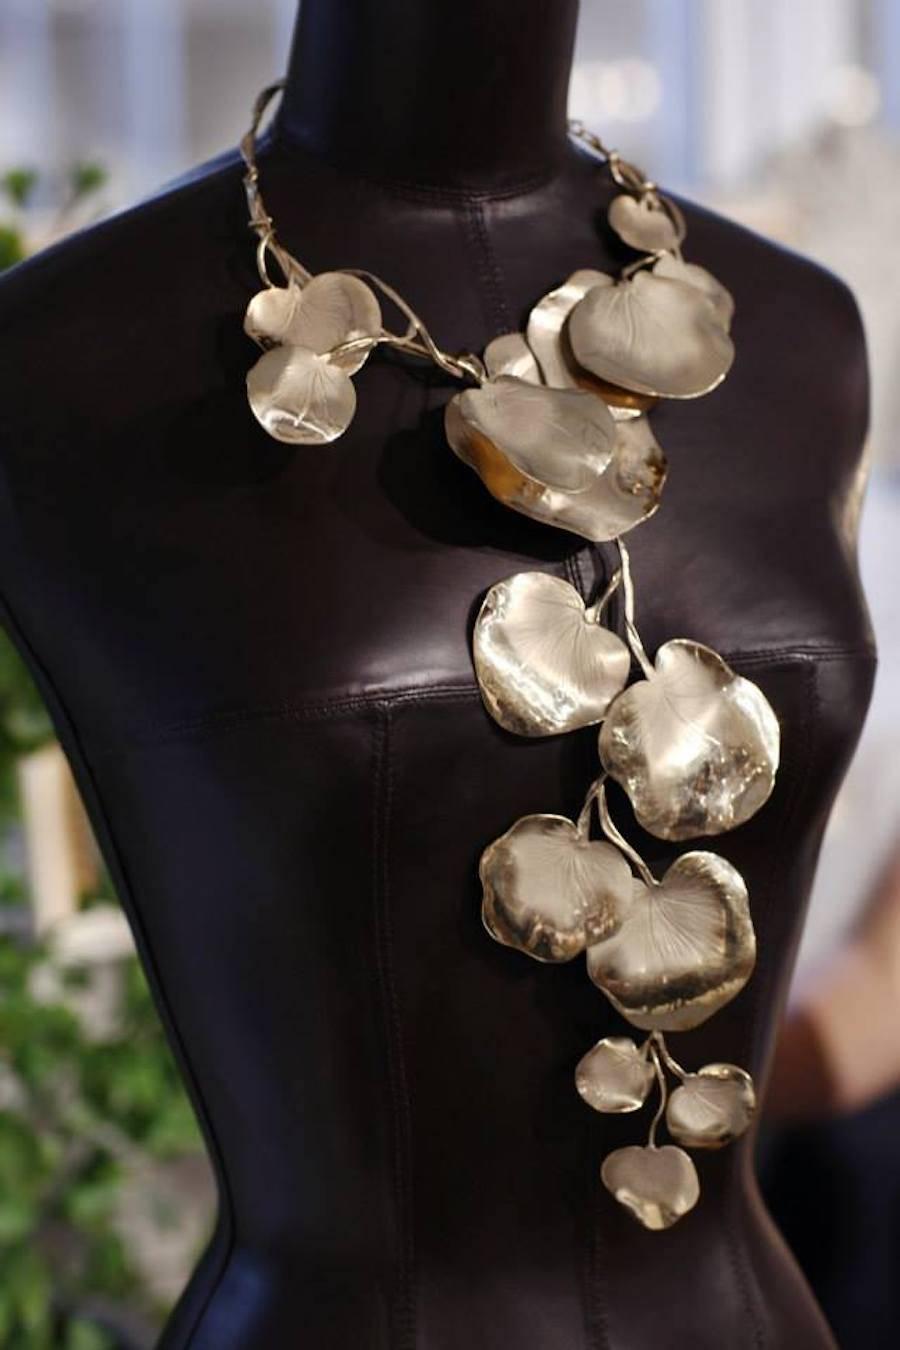 18 carat fine gold plated statement necklace from Amber & Louise. Lightweight and handmade in Paris, this necklace can be worn long as pictured and can also be worn shorter as the bottom portion is removable. 